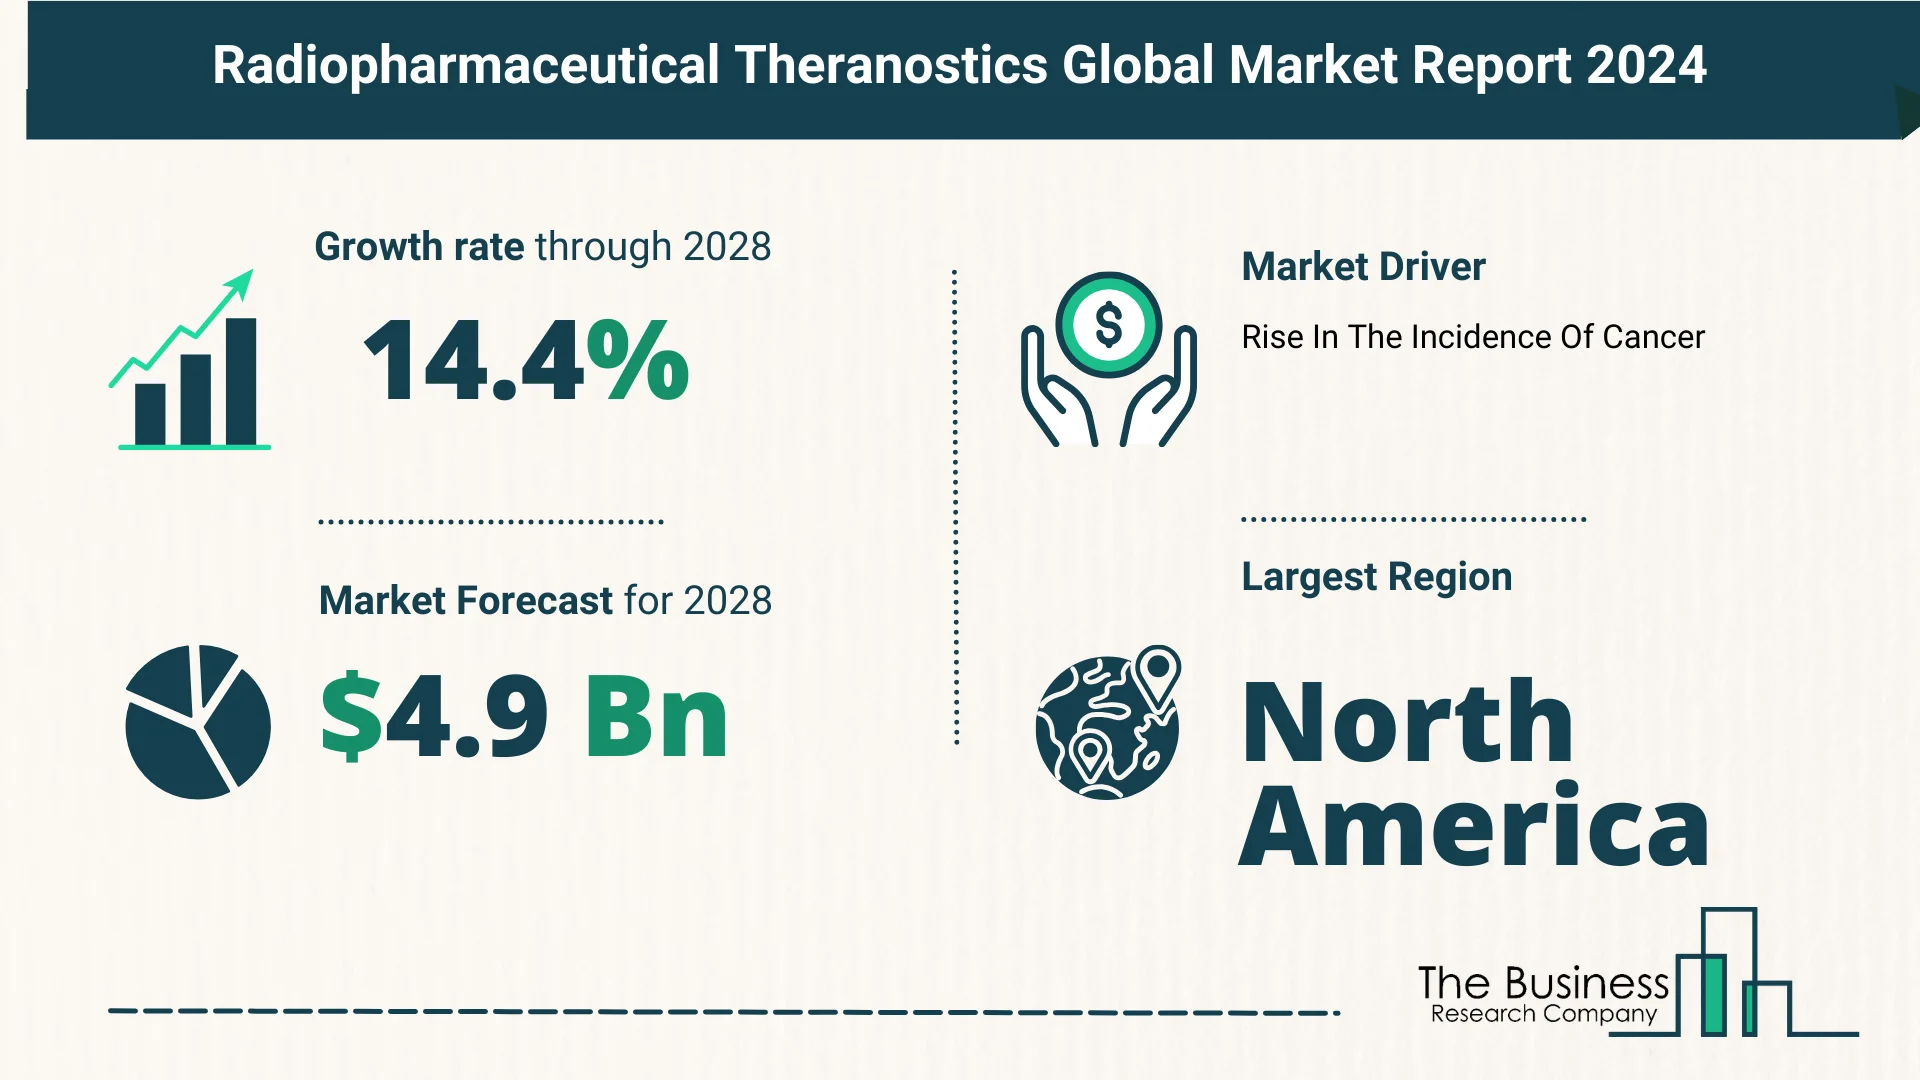 Key Trends And Drivers In The Radiopharmaceutical Theranostics Market 2024